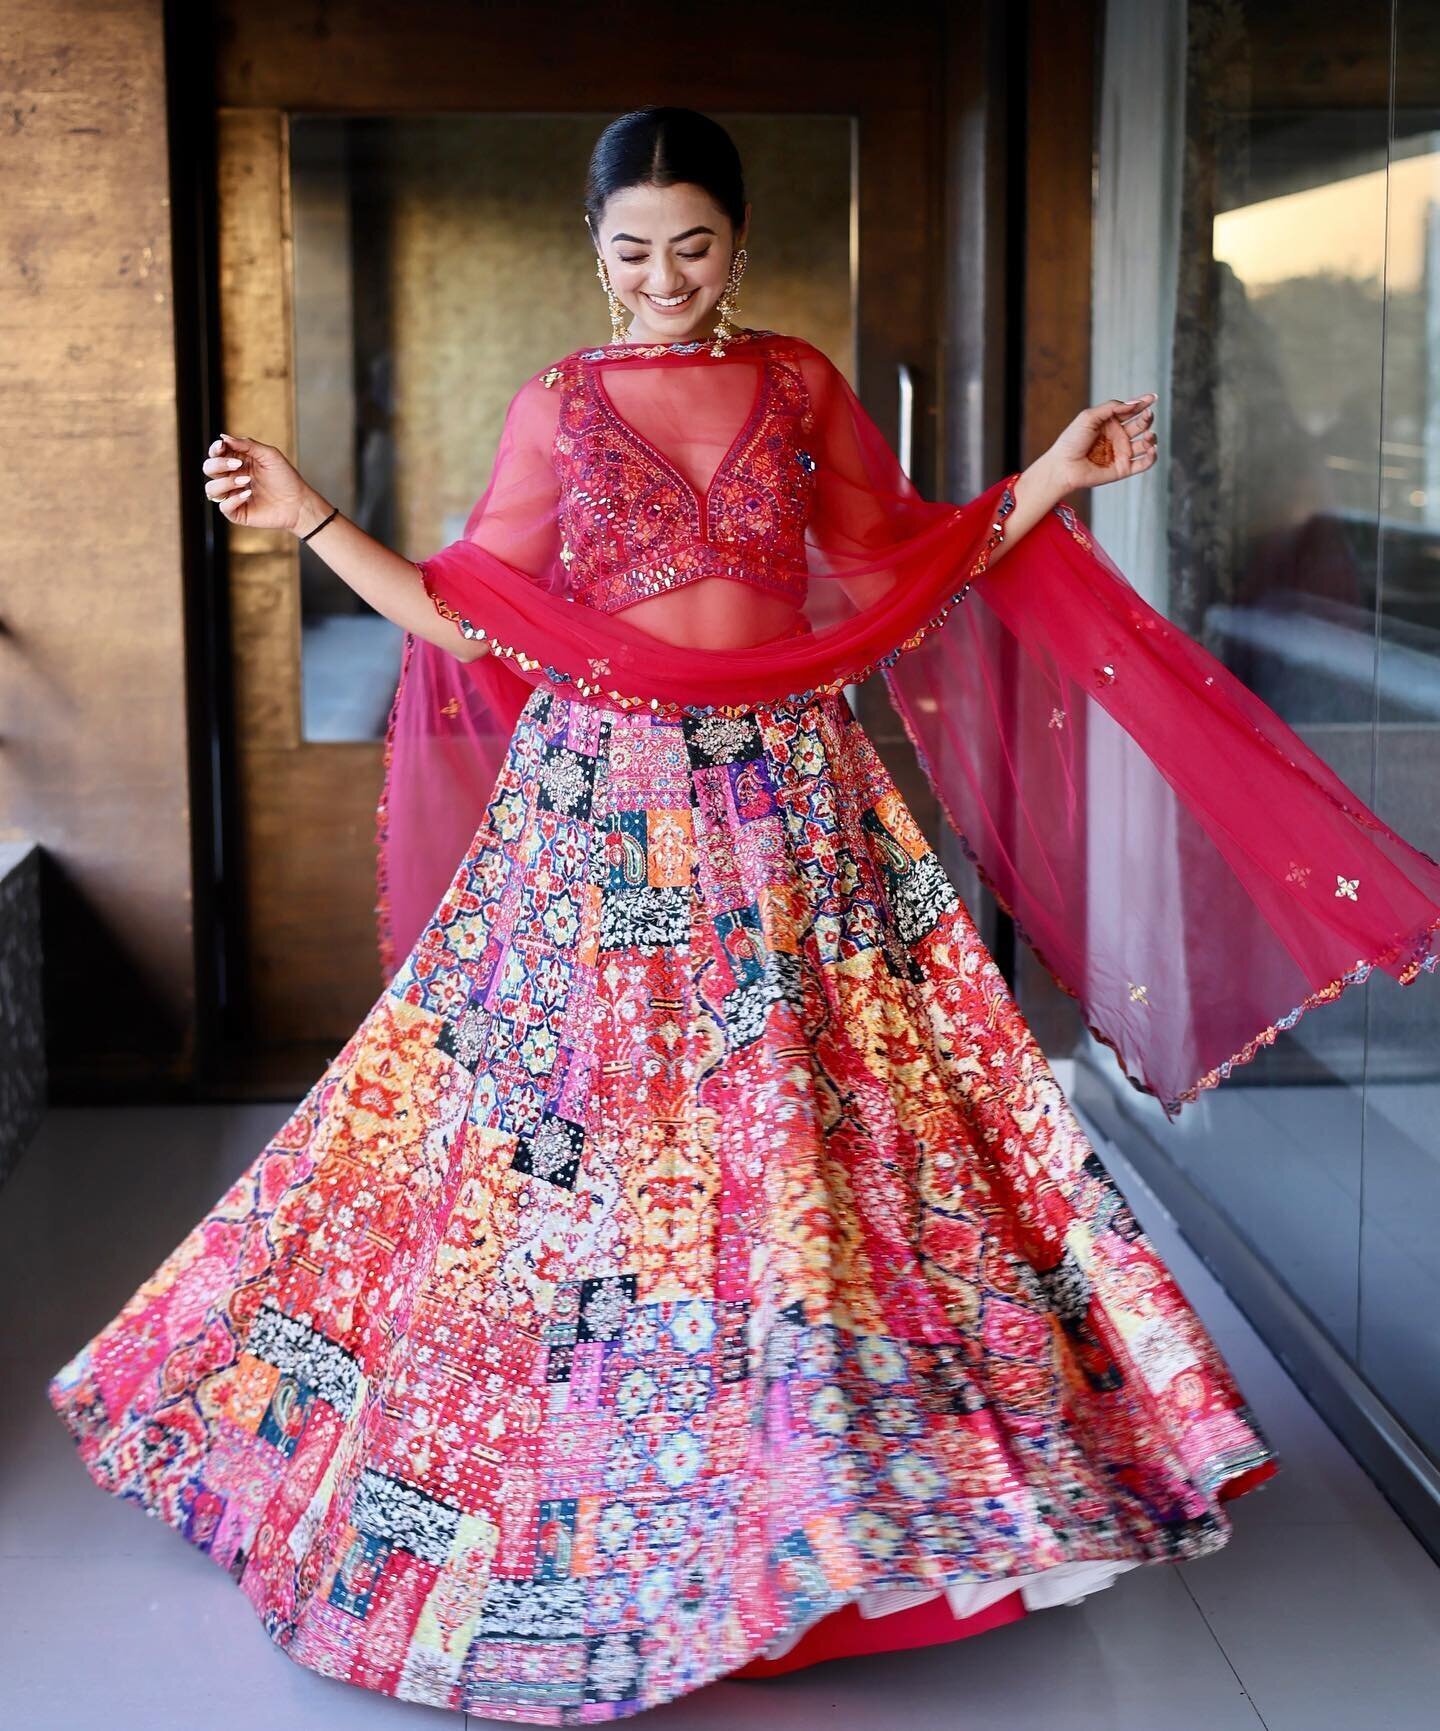 Helly Shah Latest Photos | Picture 1918317